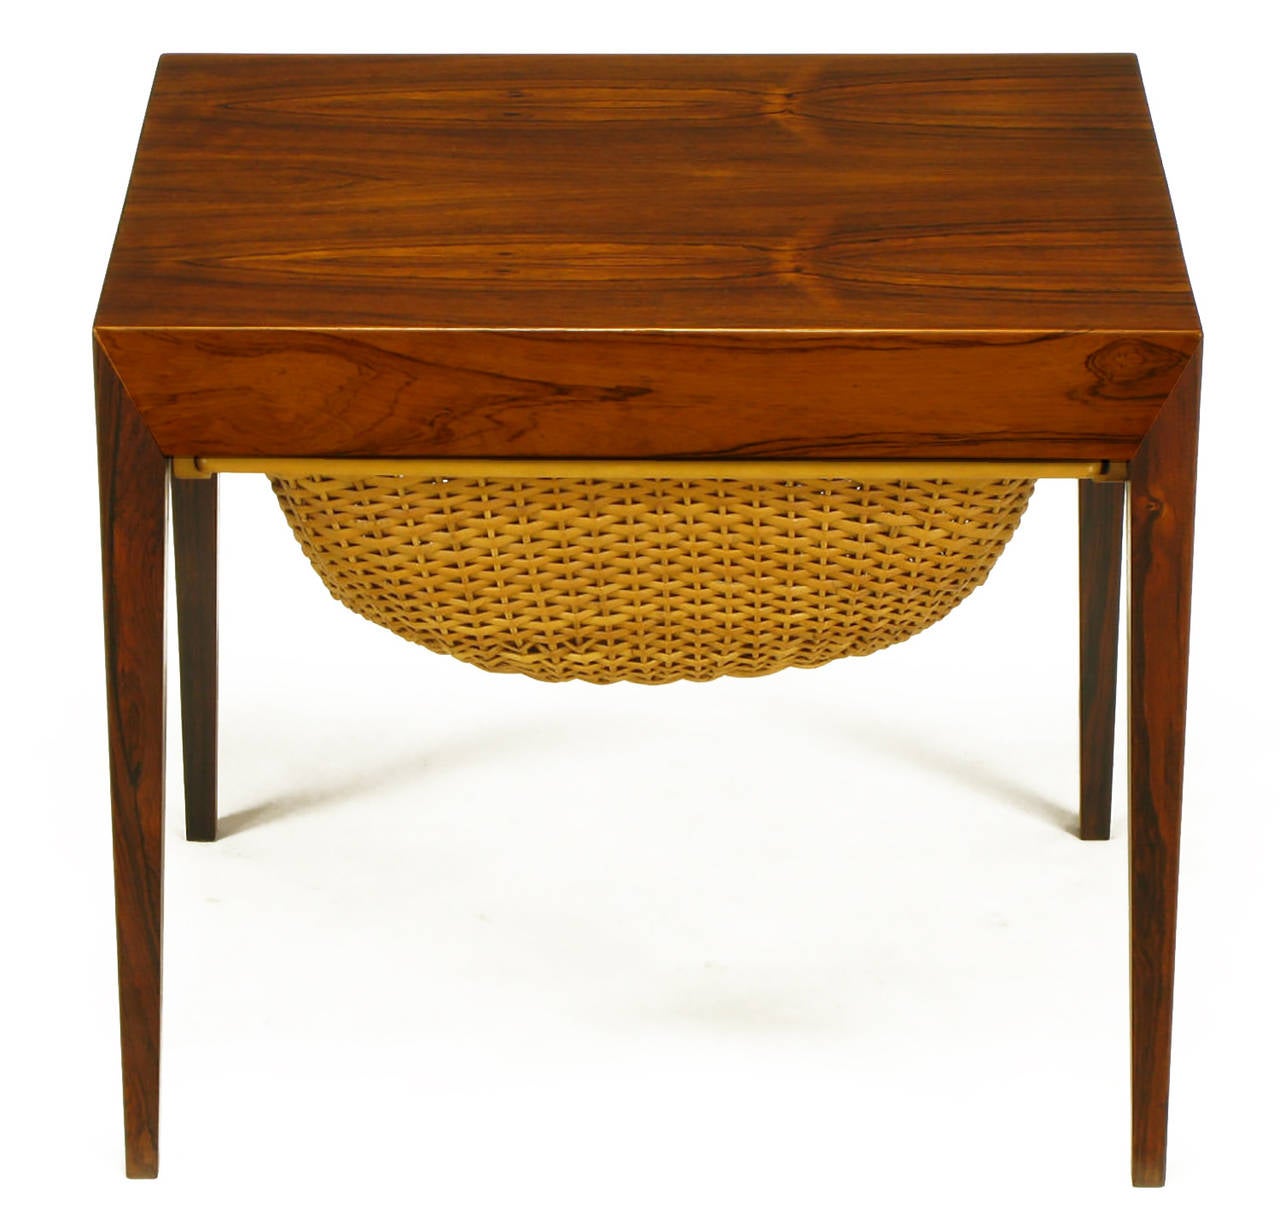 Rosewood Danish side table designed by Severin Hansen and manufactured by Haslev. Originally used as a knitting or sewing storage and work table, manufactured in Denmark. Would make an uncommon end table with a compartmental drawer and cane woven